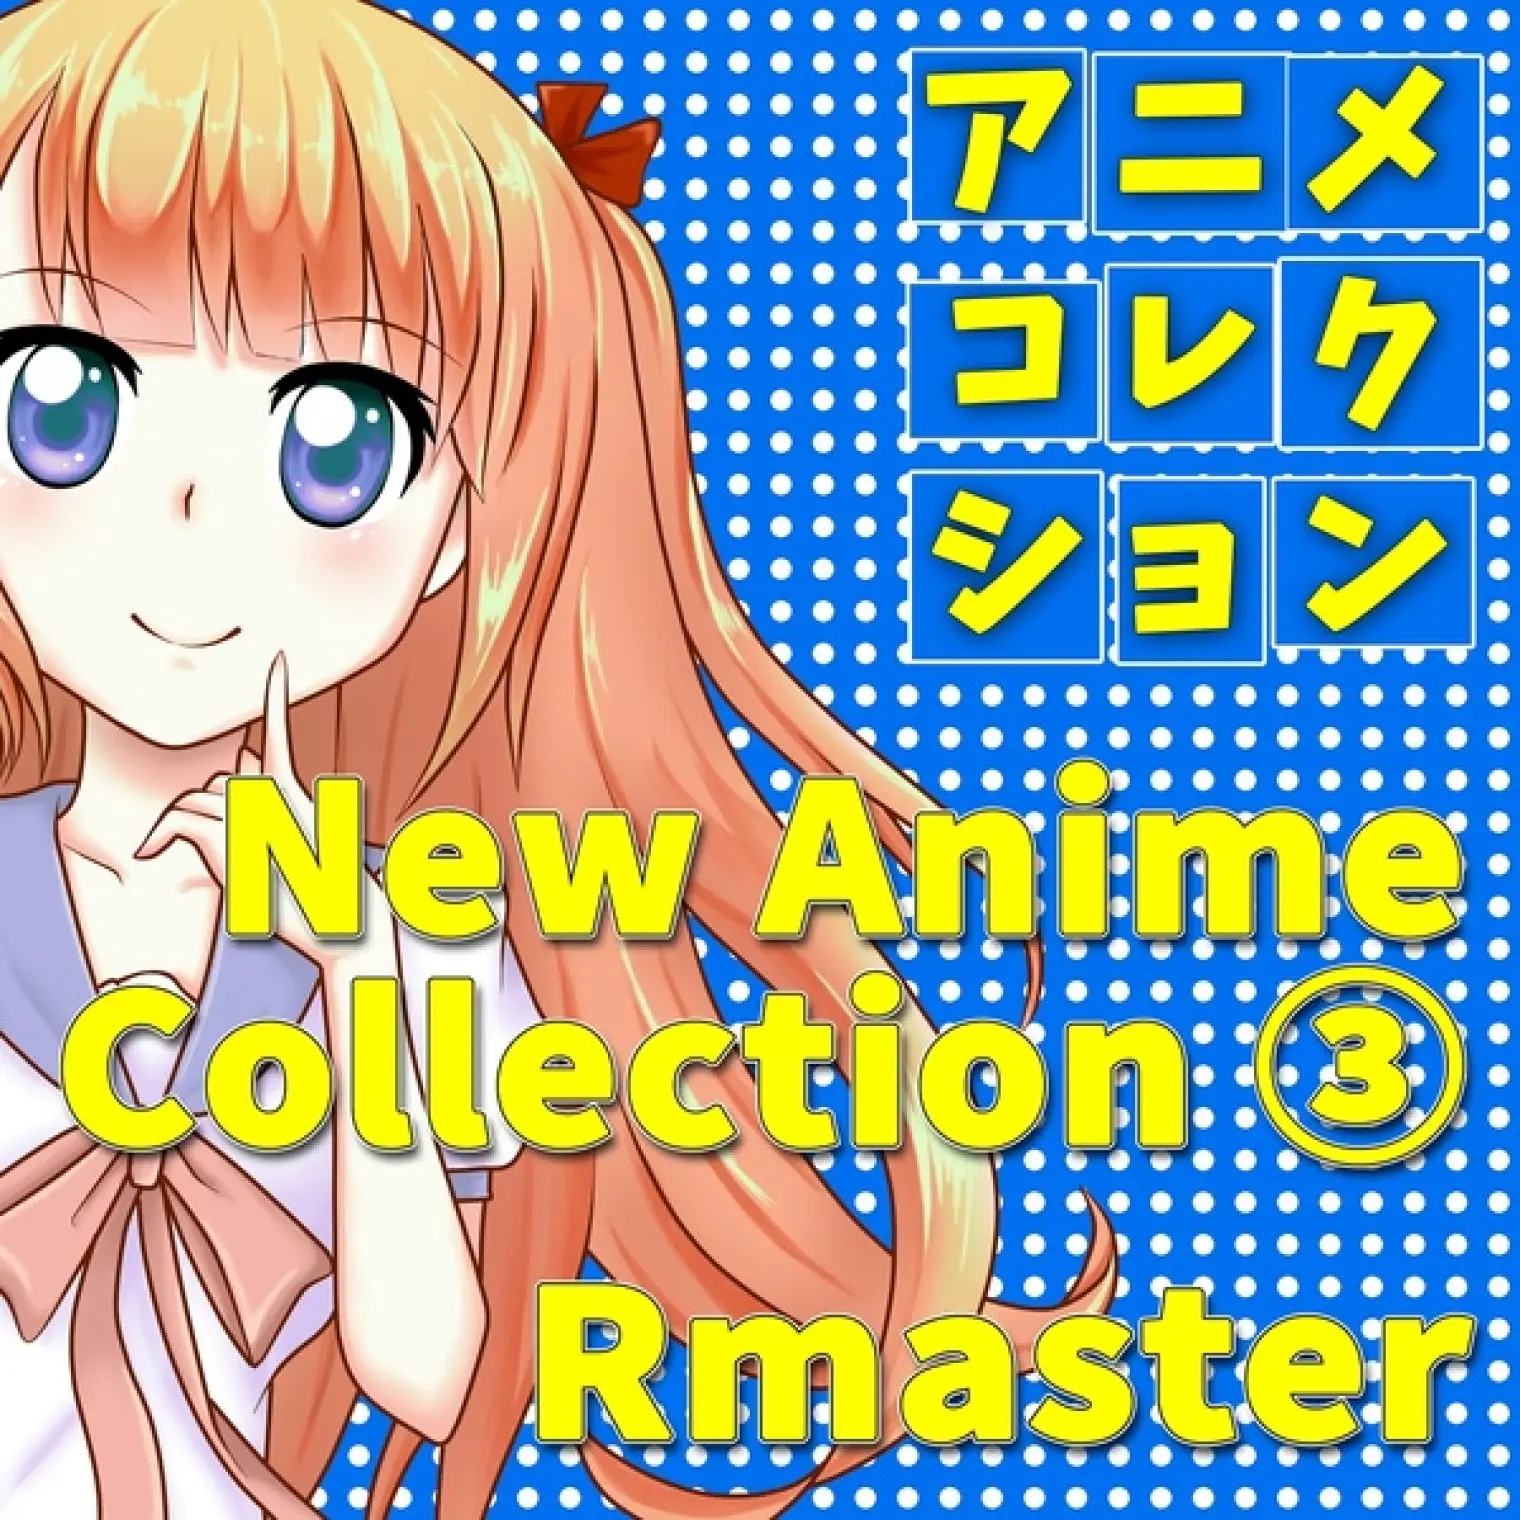 New Anime Collection, Vol.3 (Songs from "One Piece") -  RMaster 